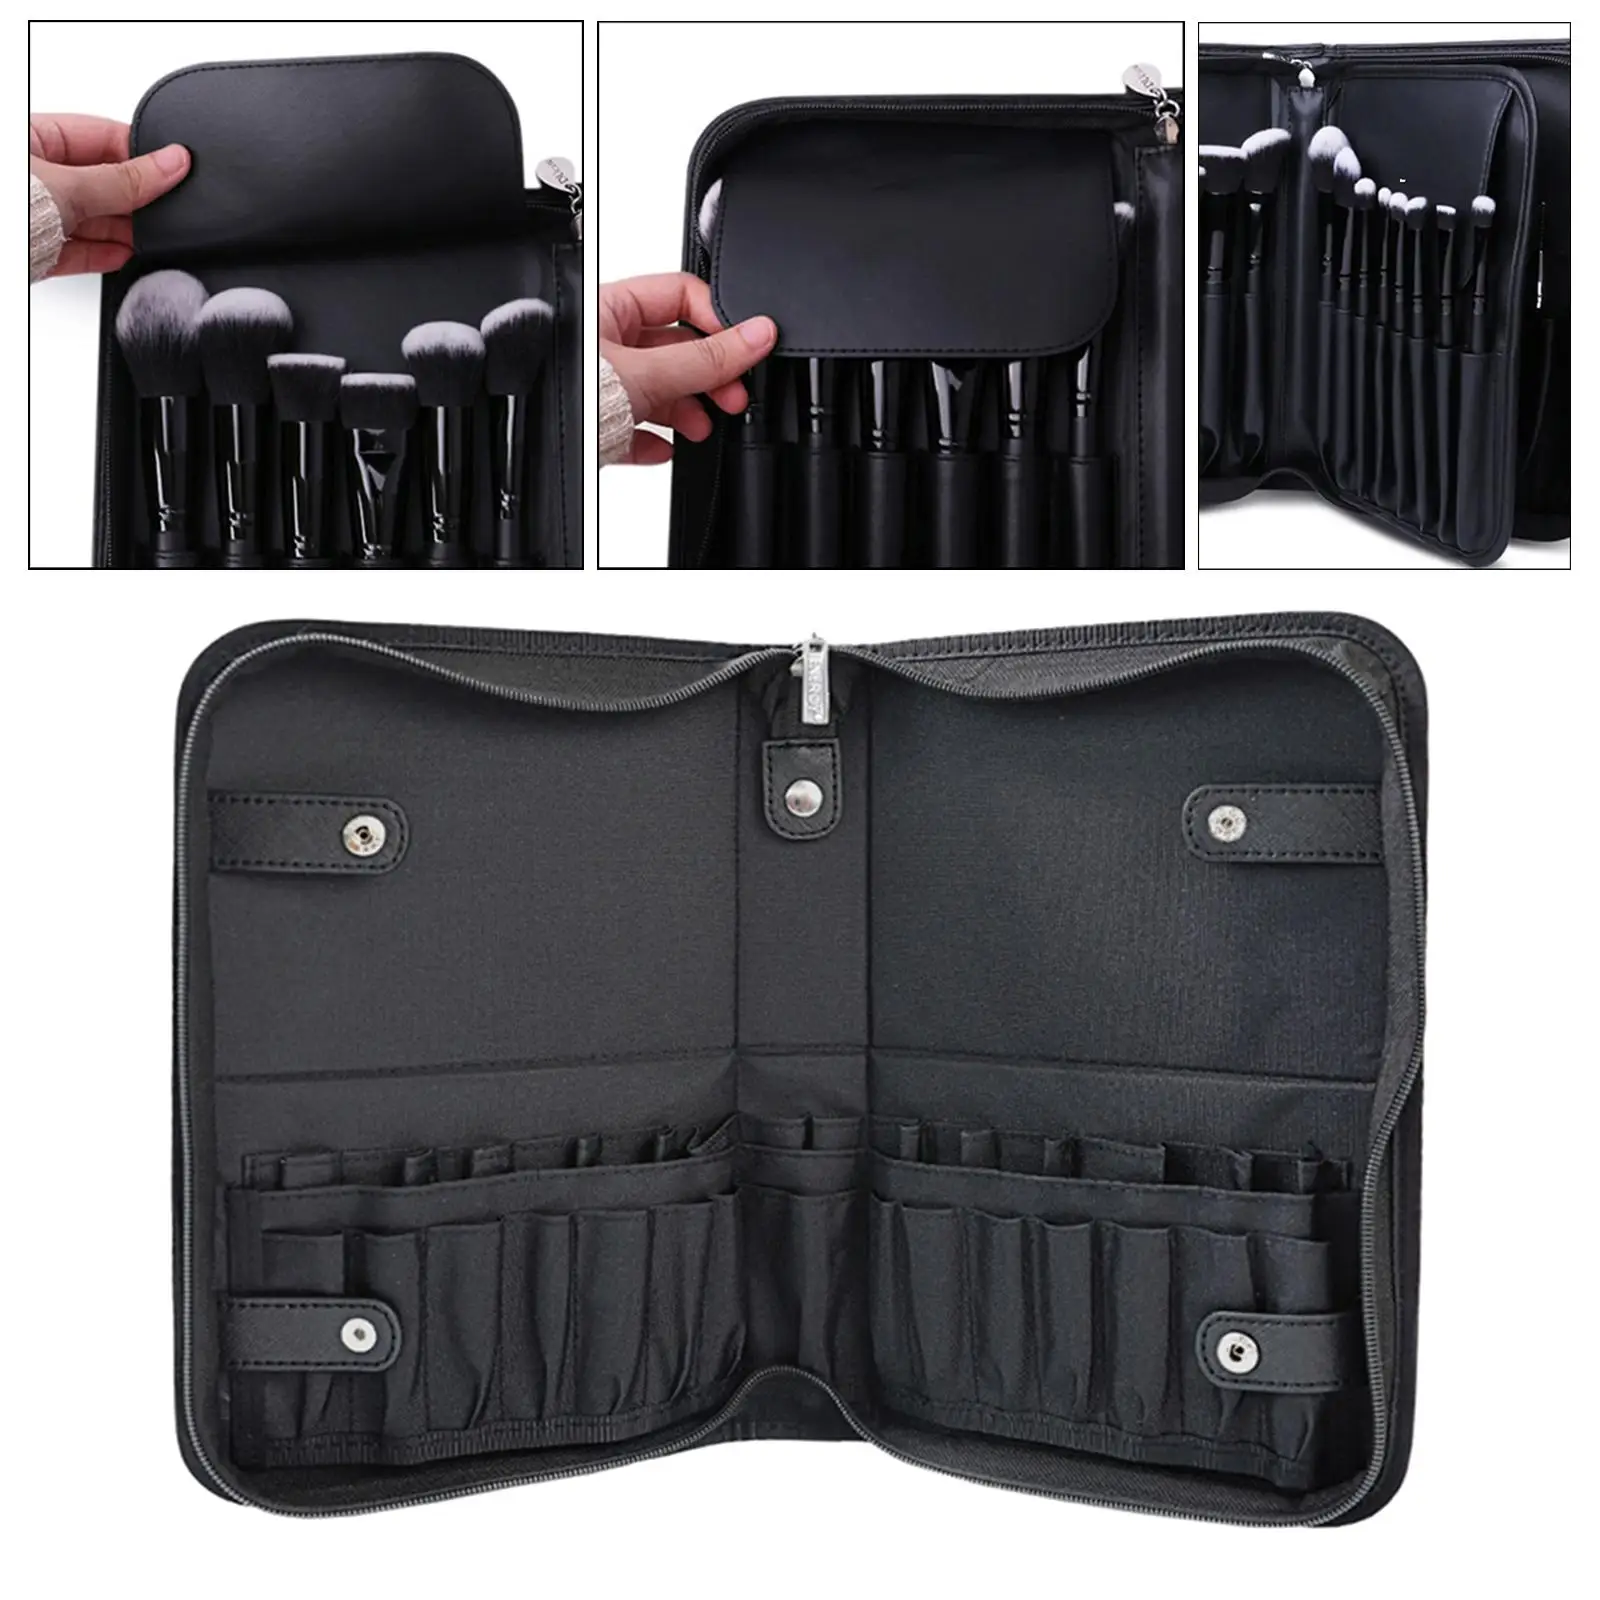 Professional Makeup Brushes Organizer  Foldable Leather Makeup Handbag Cosmetic Case for Eyebrow Pencil Women Use